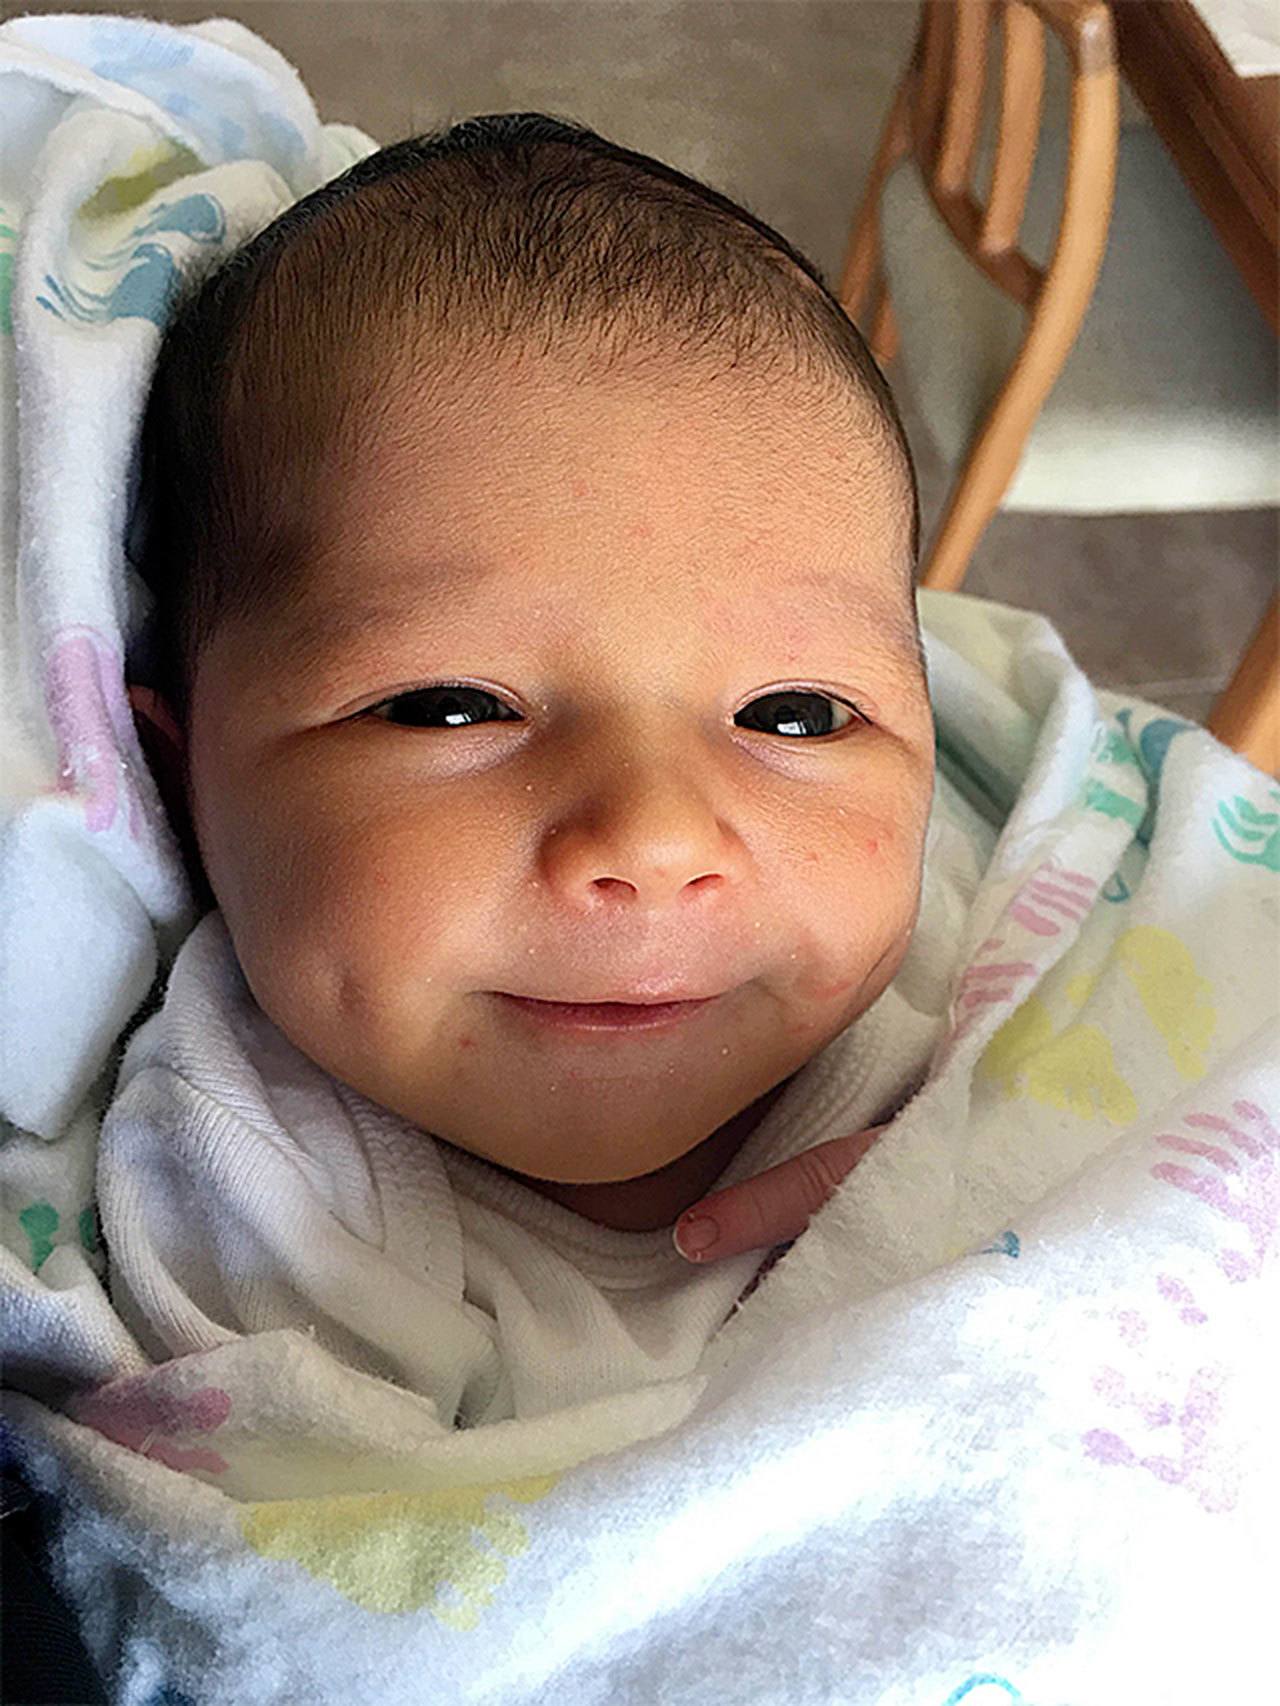 Tony and Amy Peplinski are proud to announce the birth of there first granddaughter. Alondra Damiana was born to Andrew and Atylana, of Oak Harbor, at 11:45 p.m. Oct. 20, 2016. Alondra weighed 7 pounds, 2 ounces, and was 20 inches long.